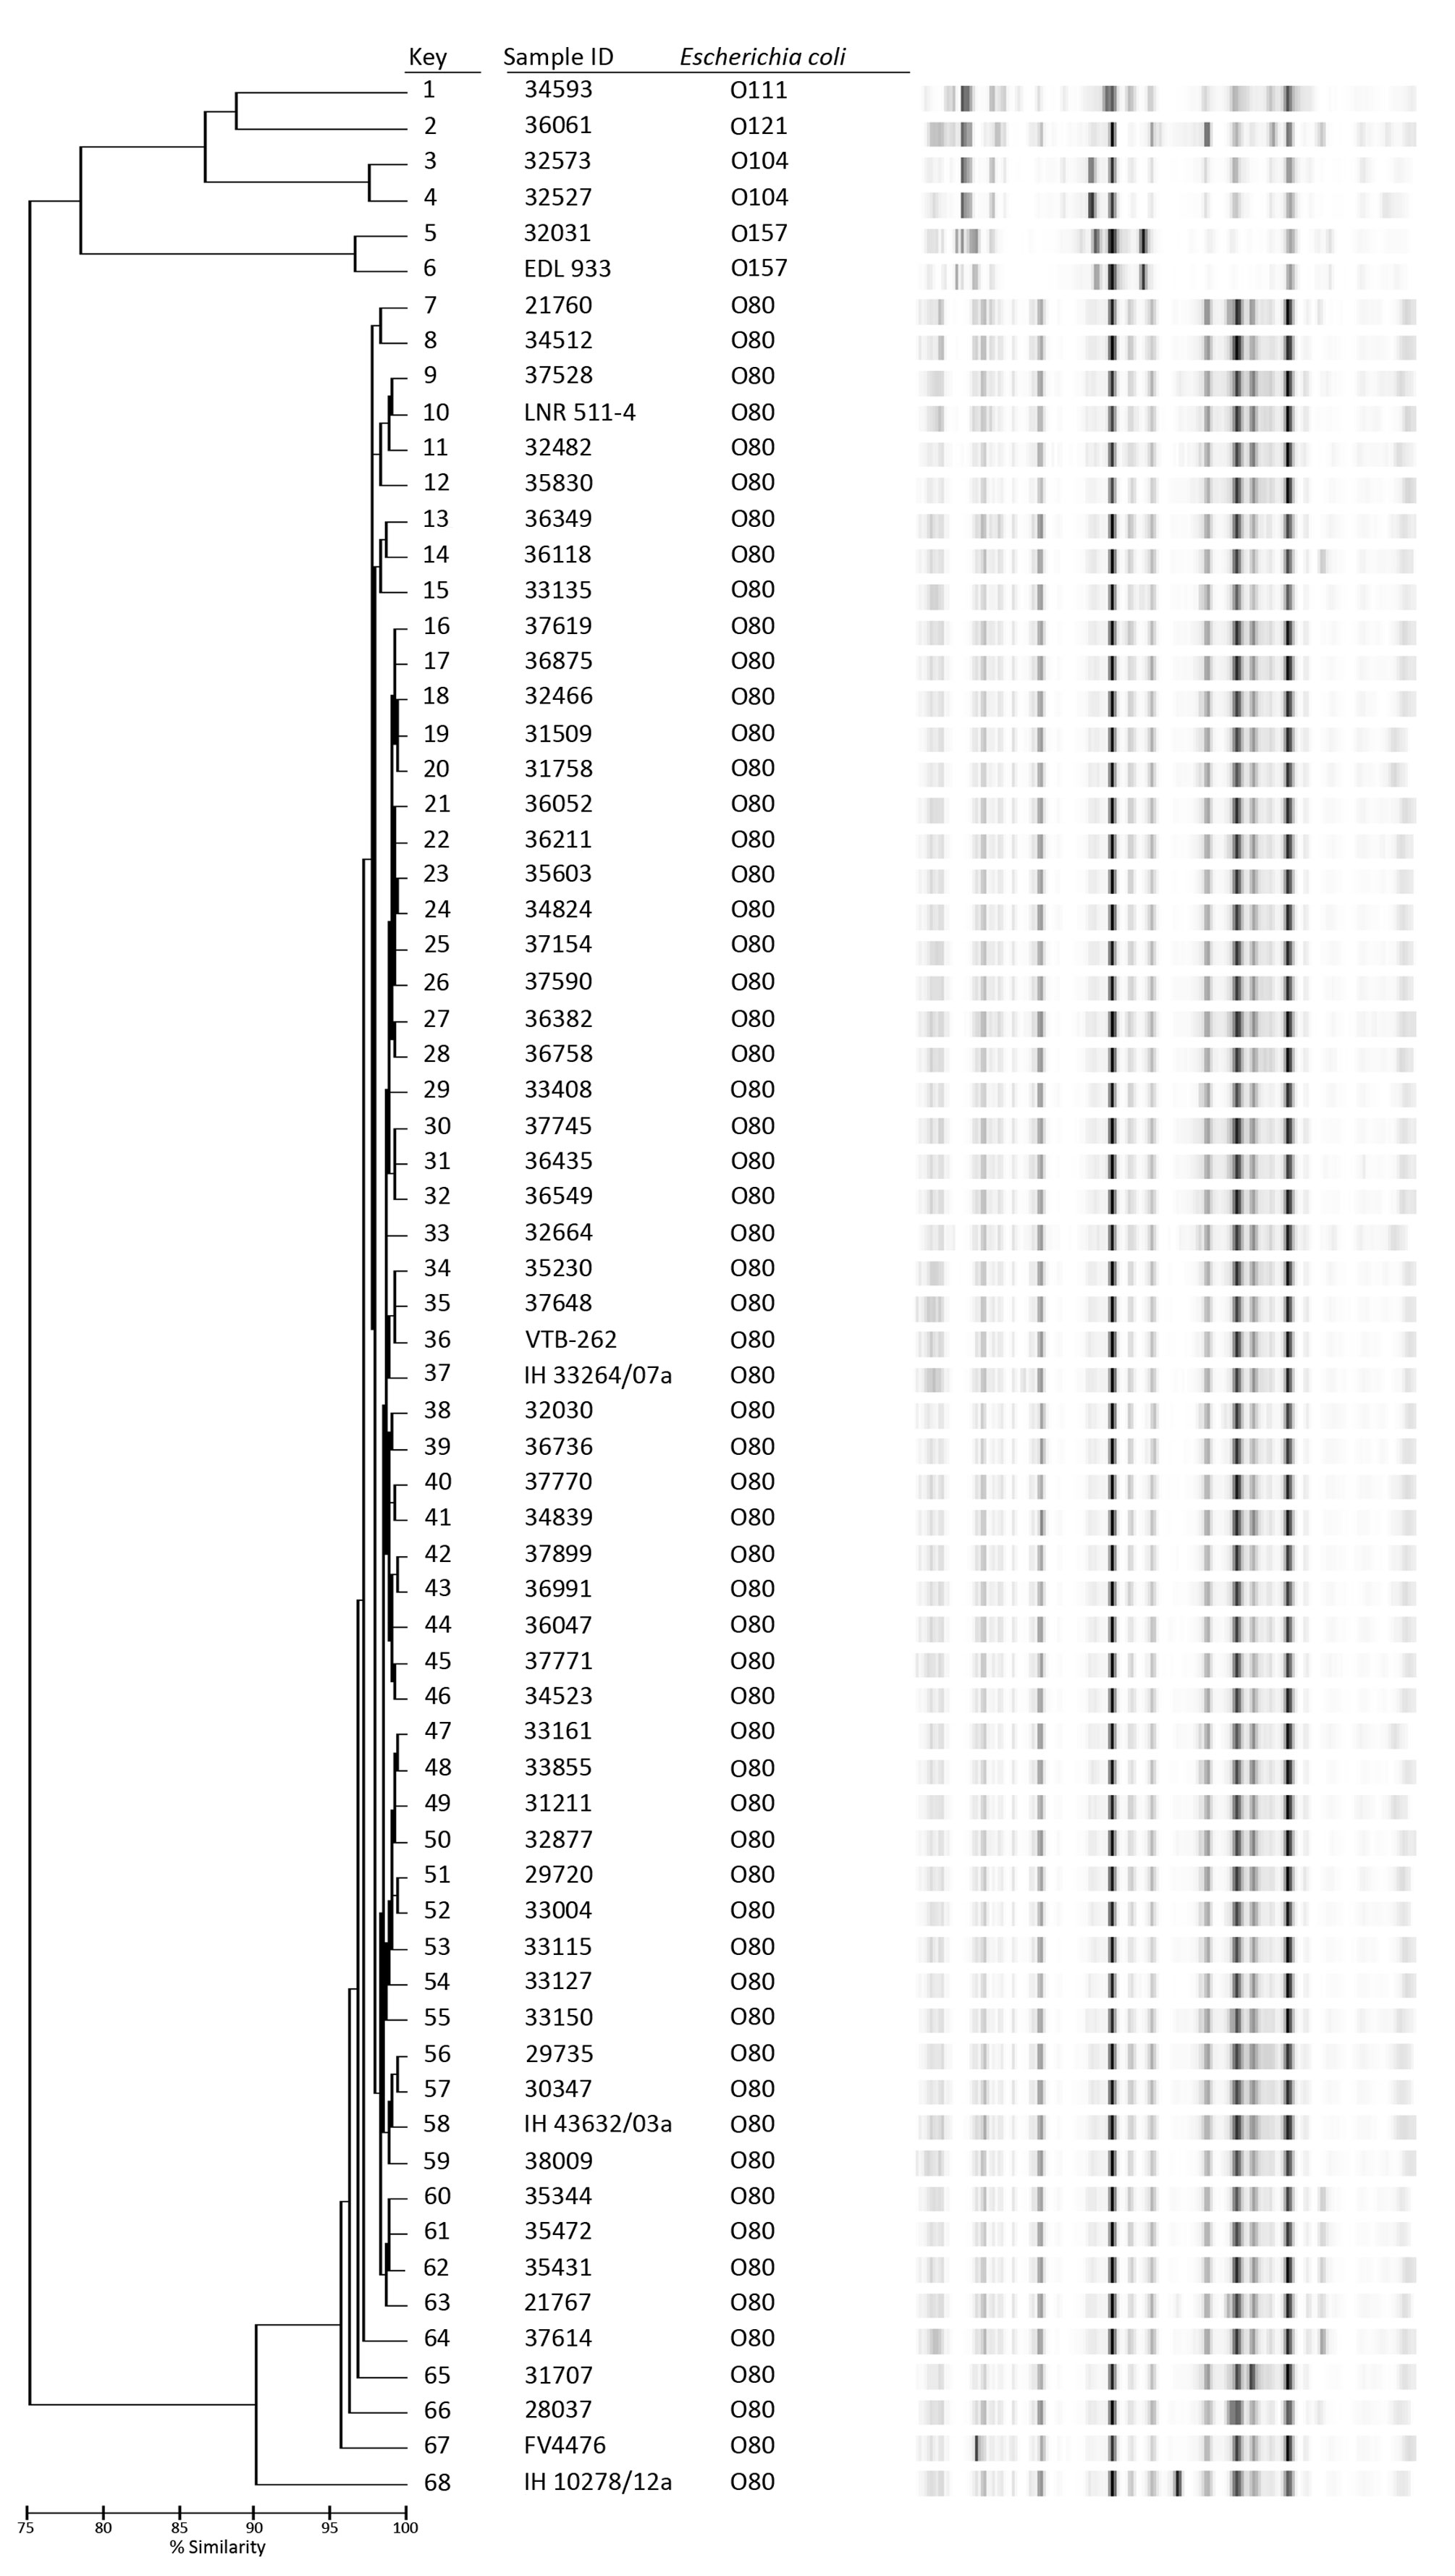 Dendrogram obtained after DiversiLab genotyping analysis (based on PCR amplification of repeat sequences of DNA) of 56 enterohemorrhagic Escherichia coli (EHEC) O80 strains from humans in France compared with other isolates detected in France, Germany, and Spain, January 2005–October 2014. Other isolates include 1 animal-origin strain from France (LNR511-4, bovine, 2012); 5 animal- and human-origin isolates from Spain (FV4476, porcine; VTB-262, bovine; IH43632/03a, IH33264/07a, and IH 102878/12a